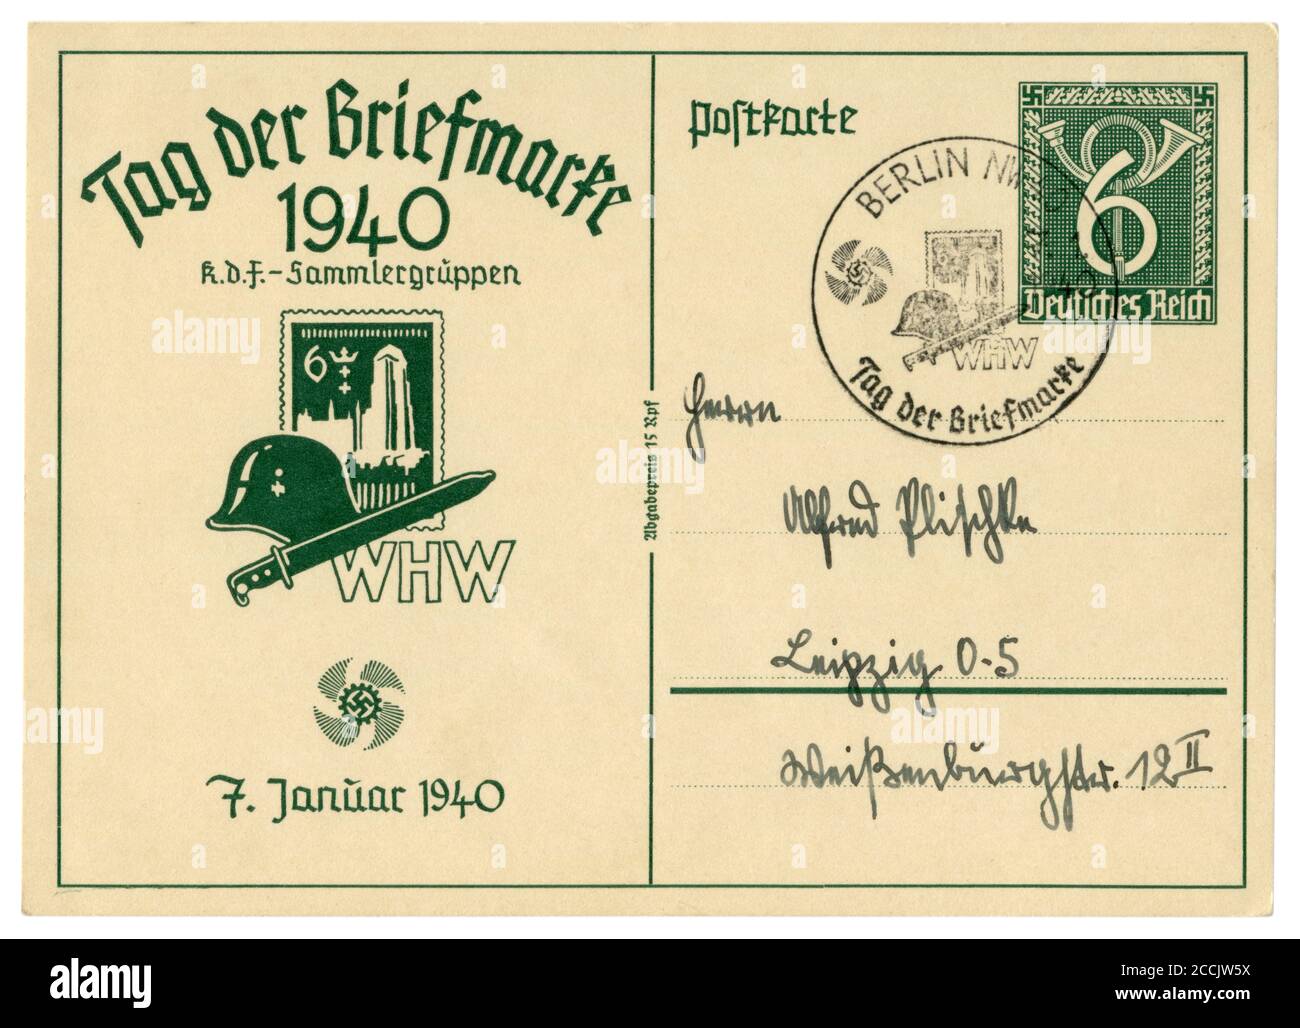 German historical postal card: Postage stamp day issue 1940: Steel helmet, bayonet knife and stamp of the occupation of Danzig, special cancellation. Stock Photo